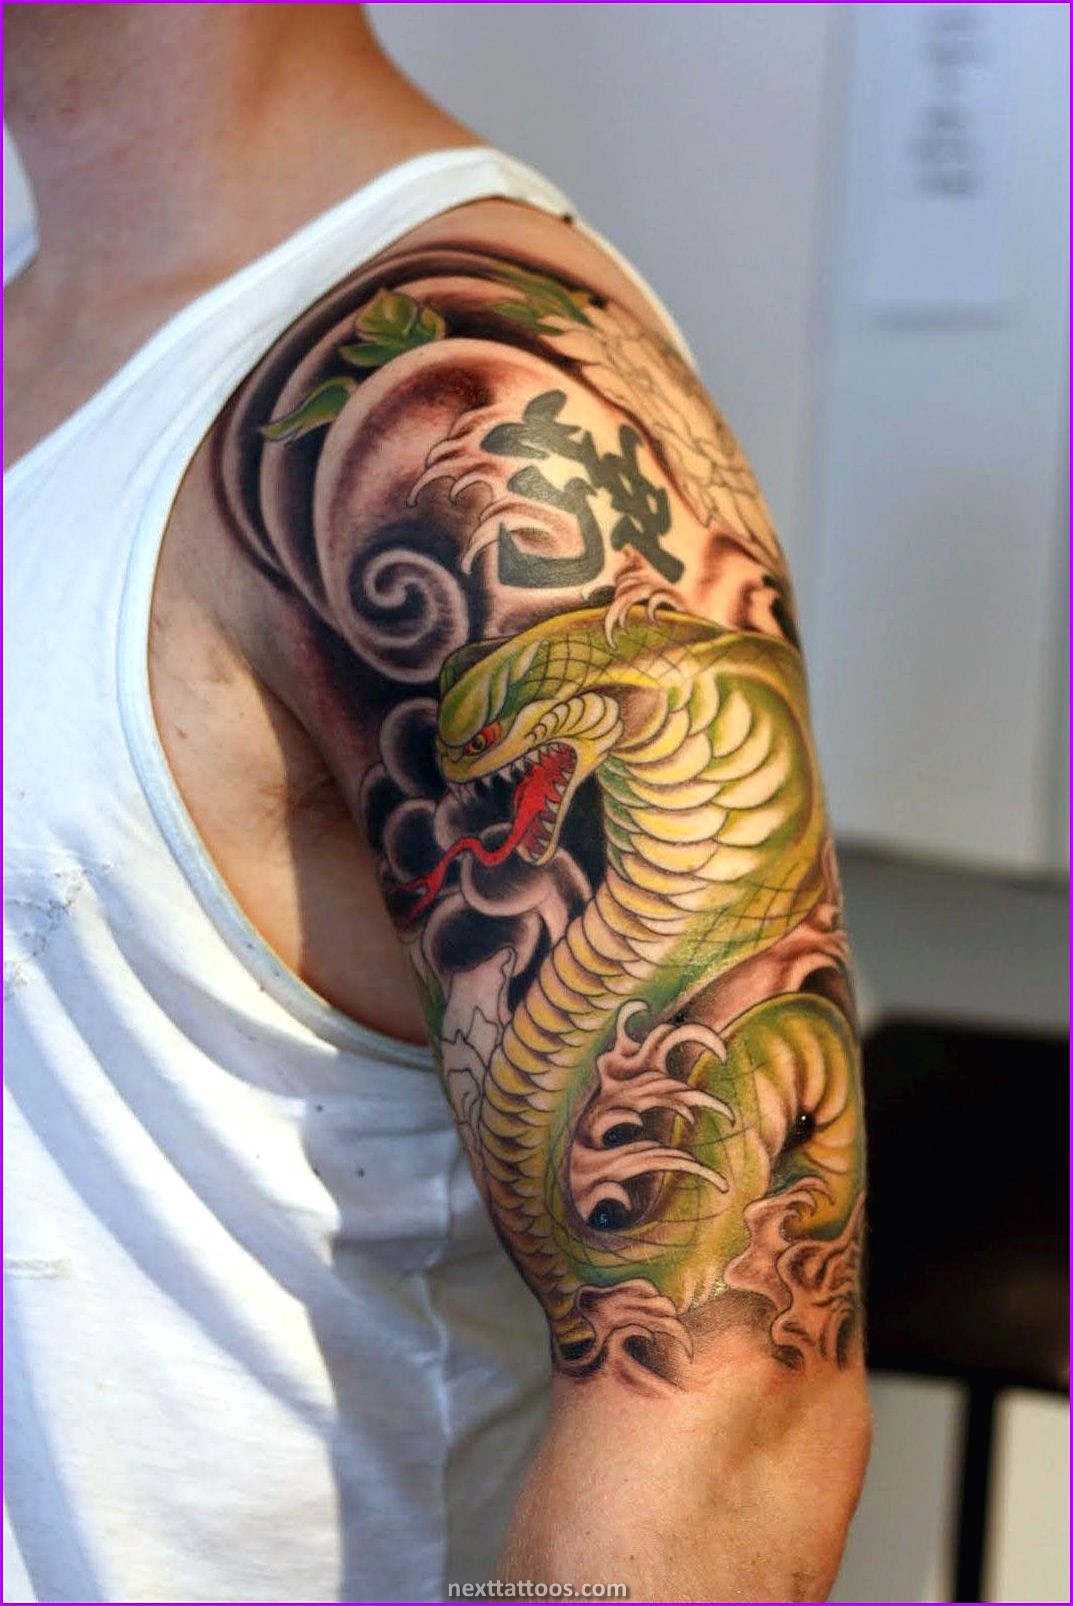 Arm Cool Tattoos For Guys and Women